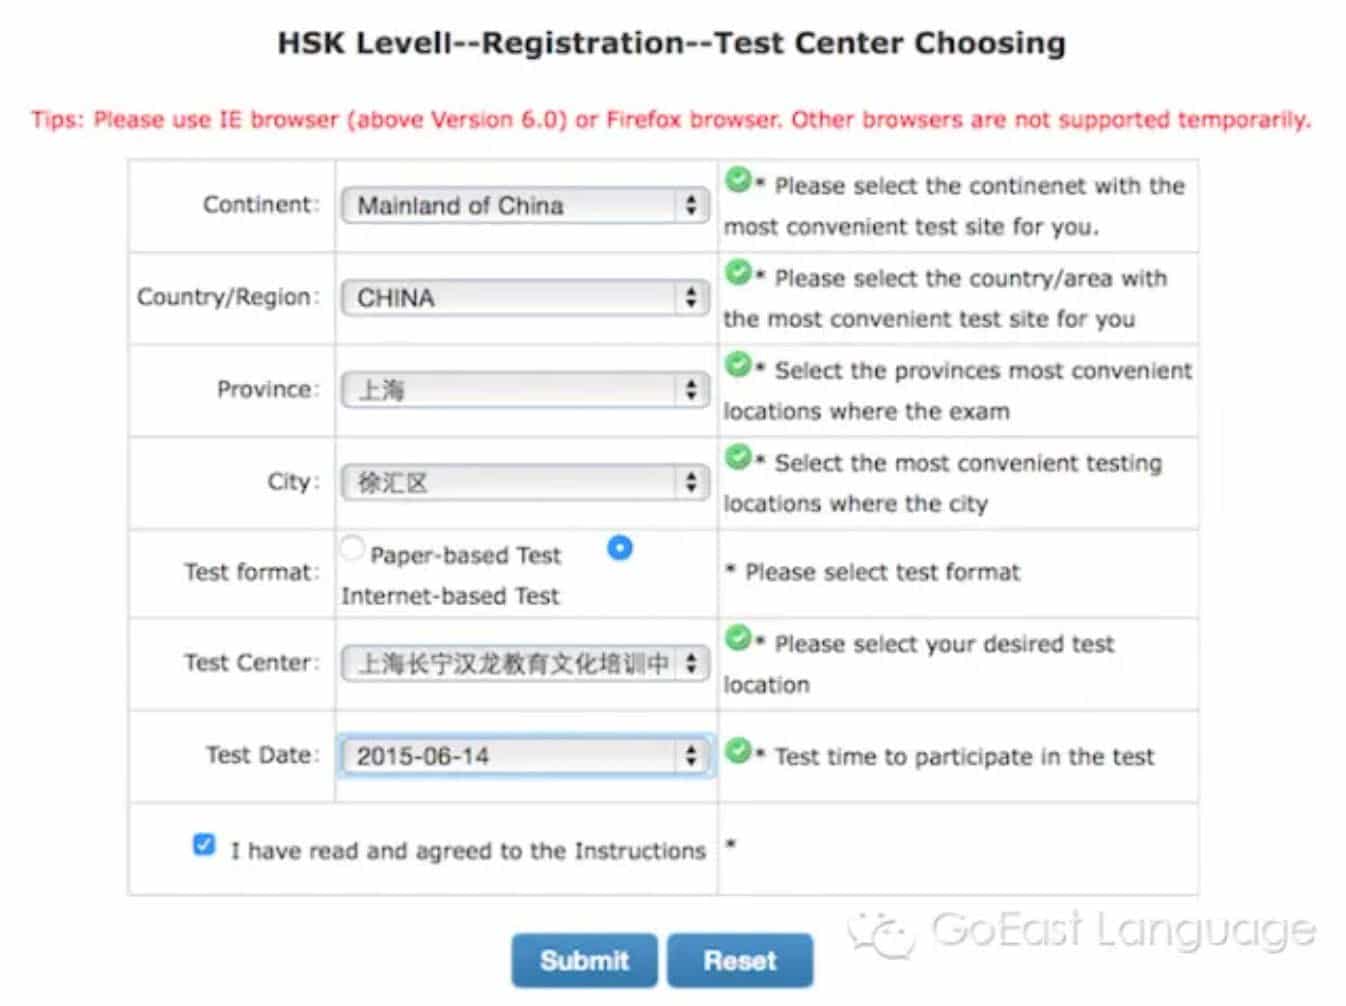 How to register for a HSK exam